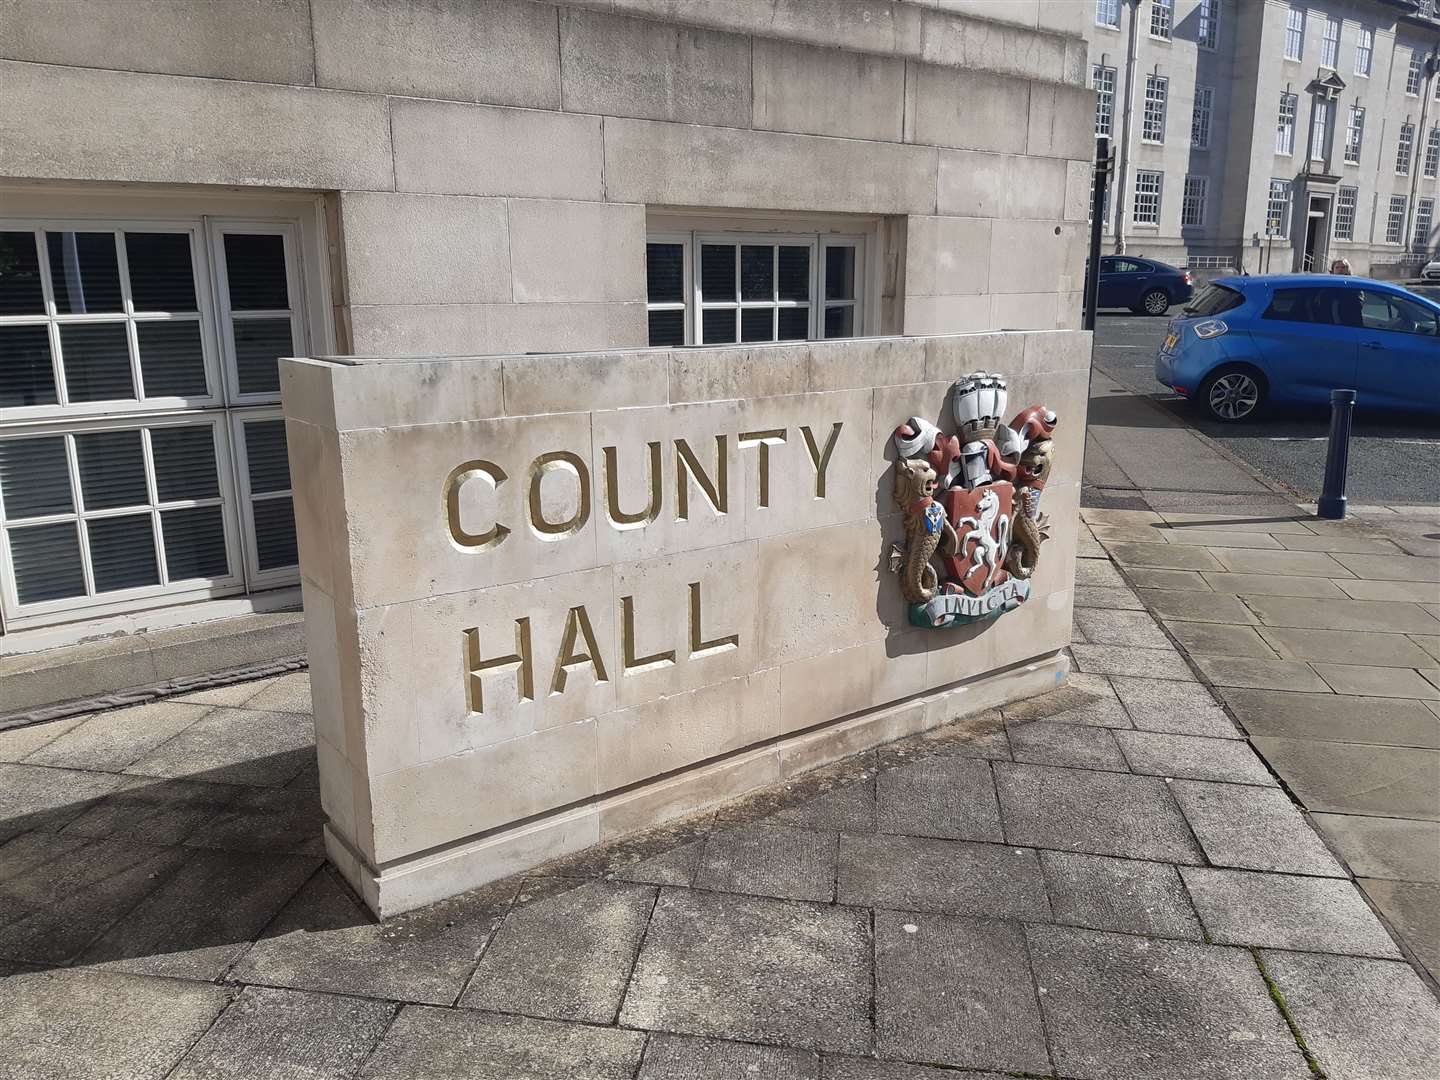 The meeting took place at County Hall